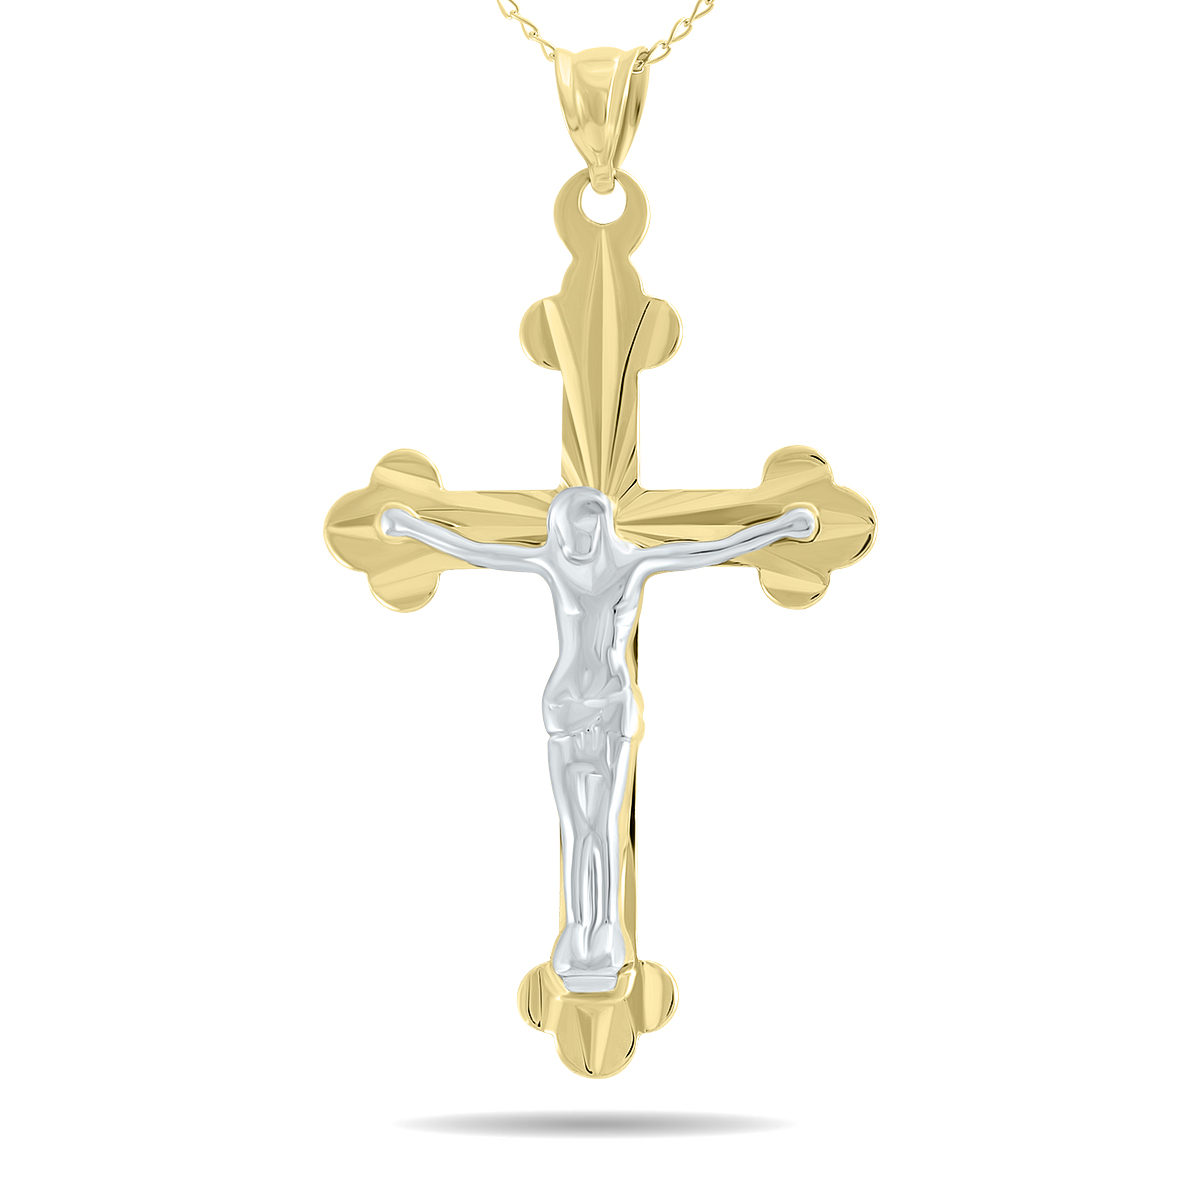 Ornate Crucifixion Roman Cross Pendant In 10K Yellow Gold With White Rhodium Accents